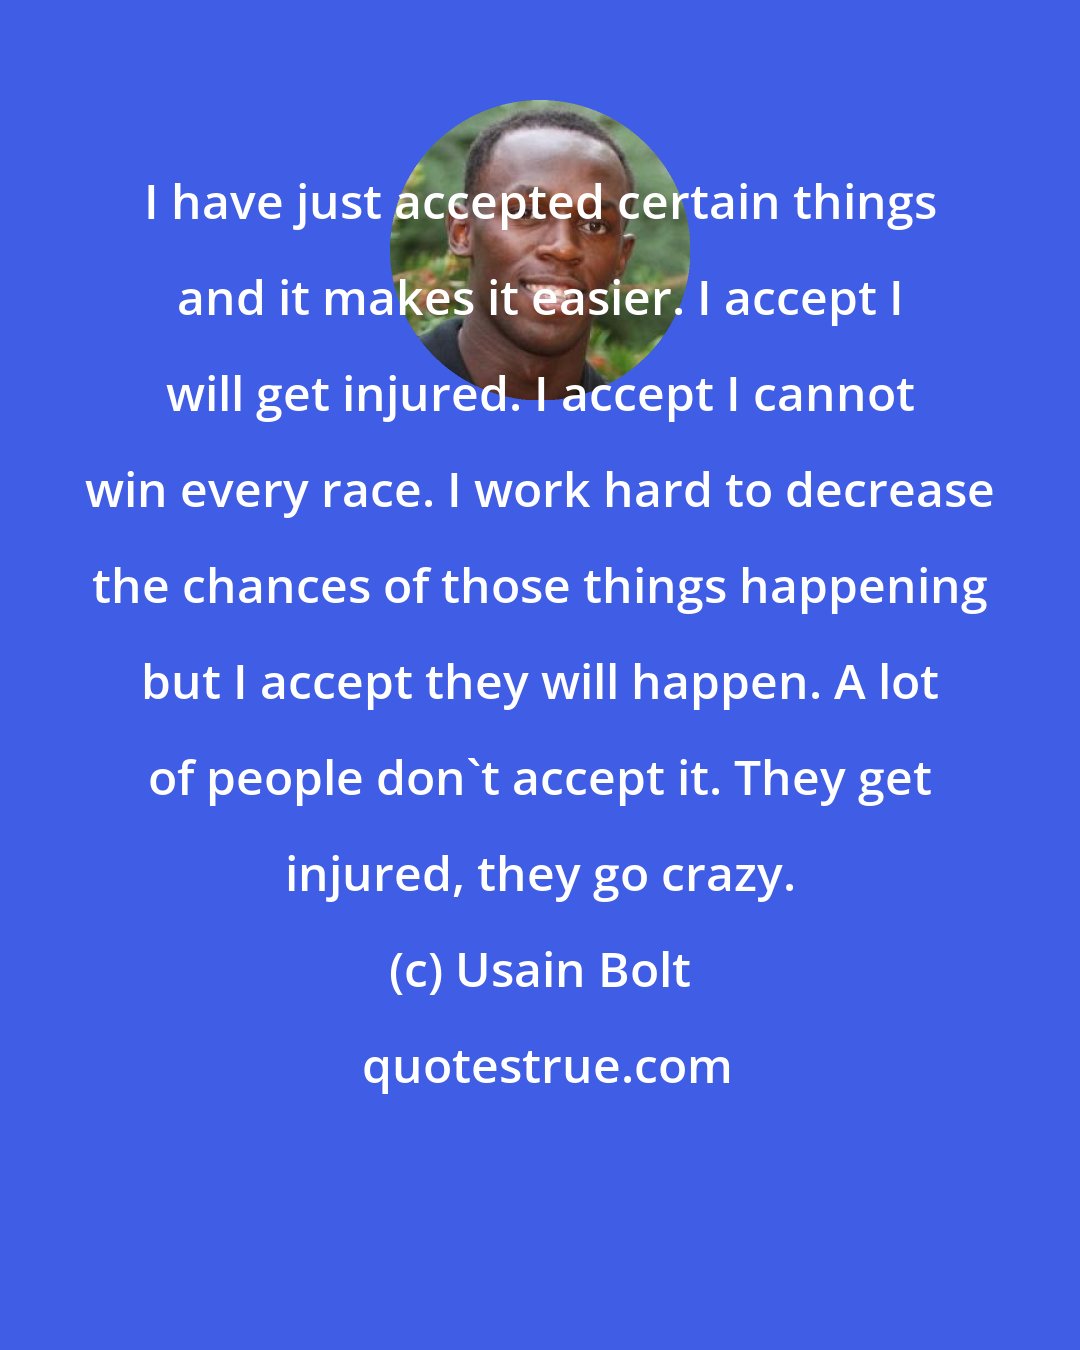 Usain Bolt: I have just accepted certain things and it makes it easier. I accept I will get injured. I accept I cannot win every race. I work hard to decrease the chances of those things happening but I accept they will happen. A lot of people don't accept it. They get injured, they go crazy.